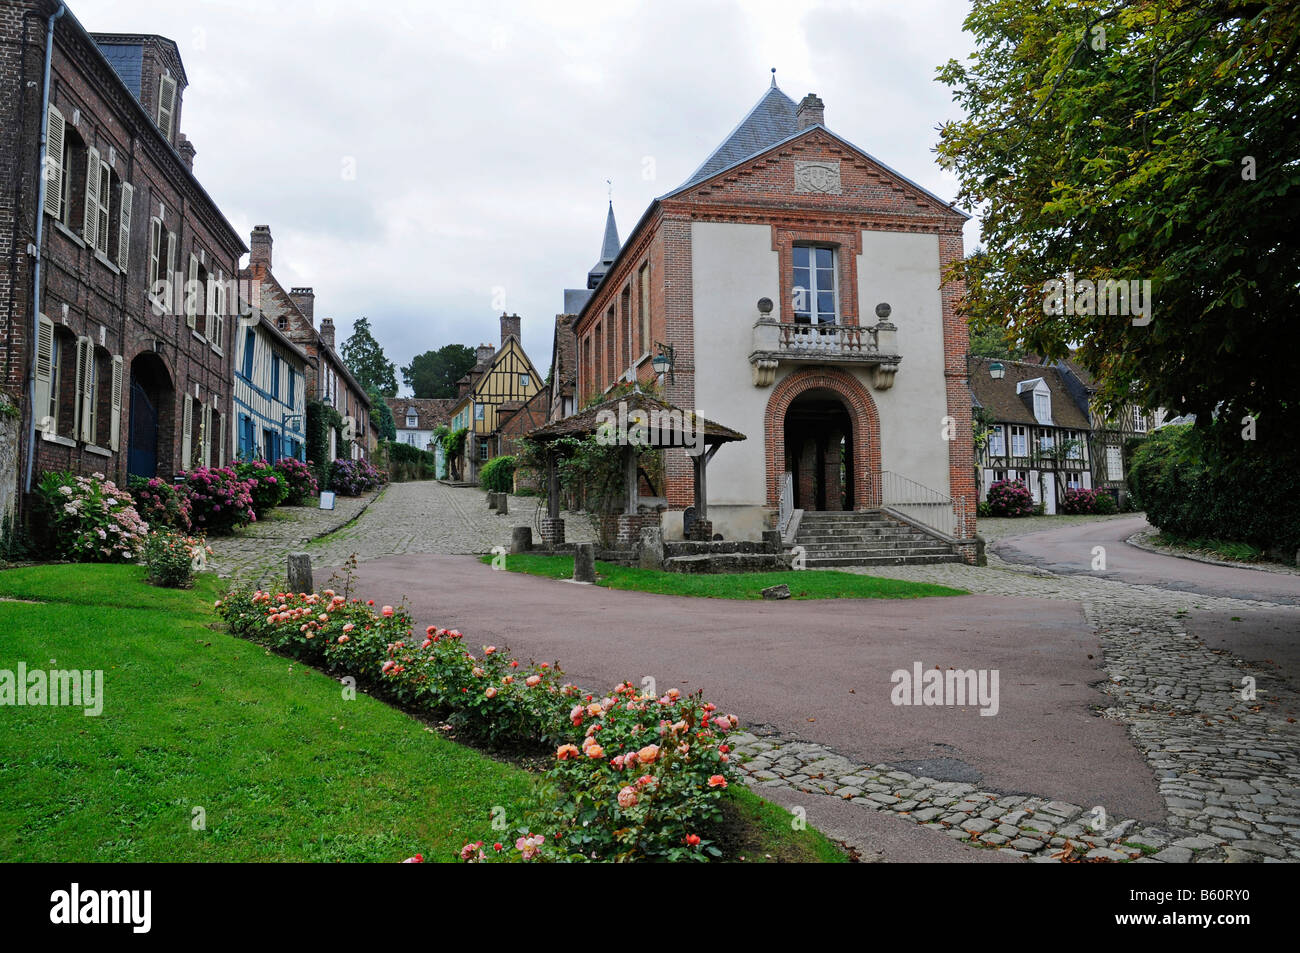 Streets, houses, old, historic, small village, town view, Gerberoy, Picardie, France, Europe Stock Photo